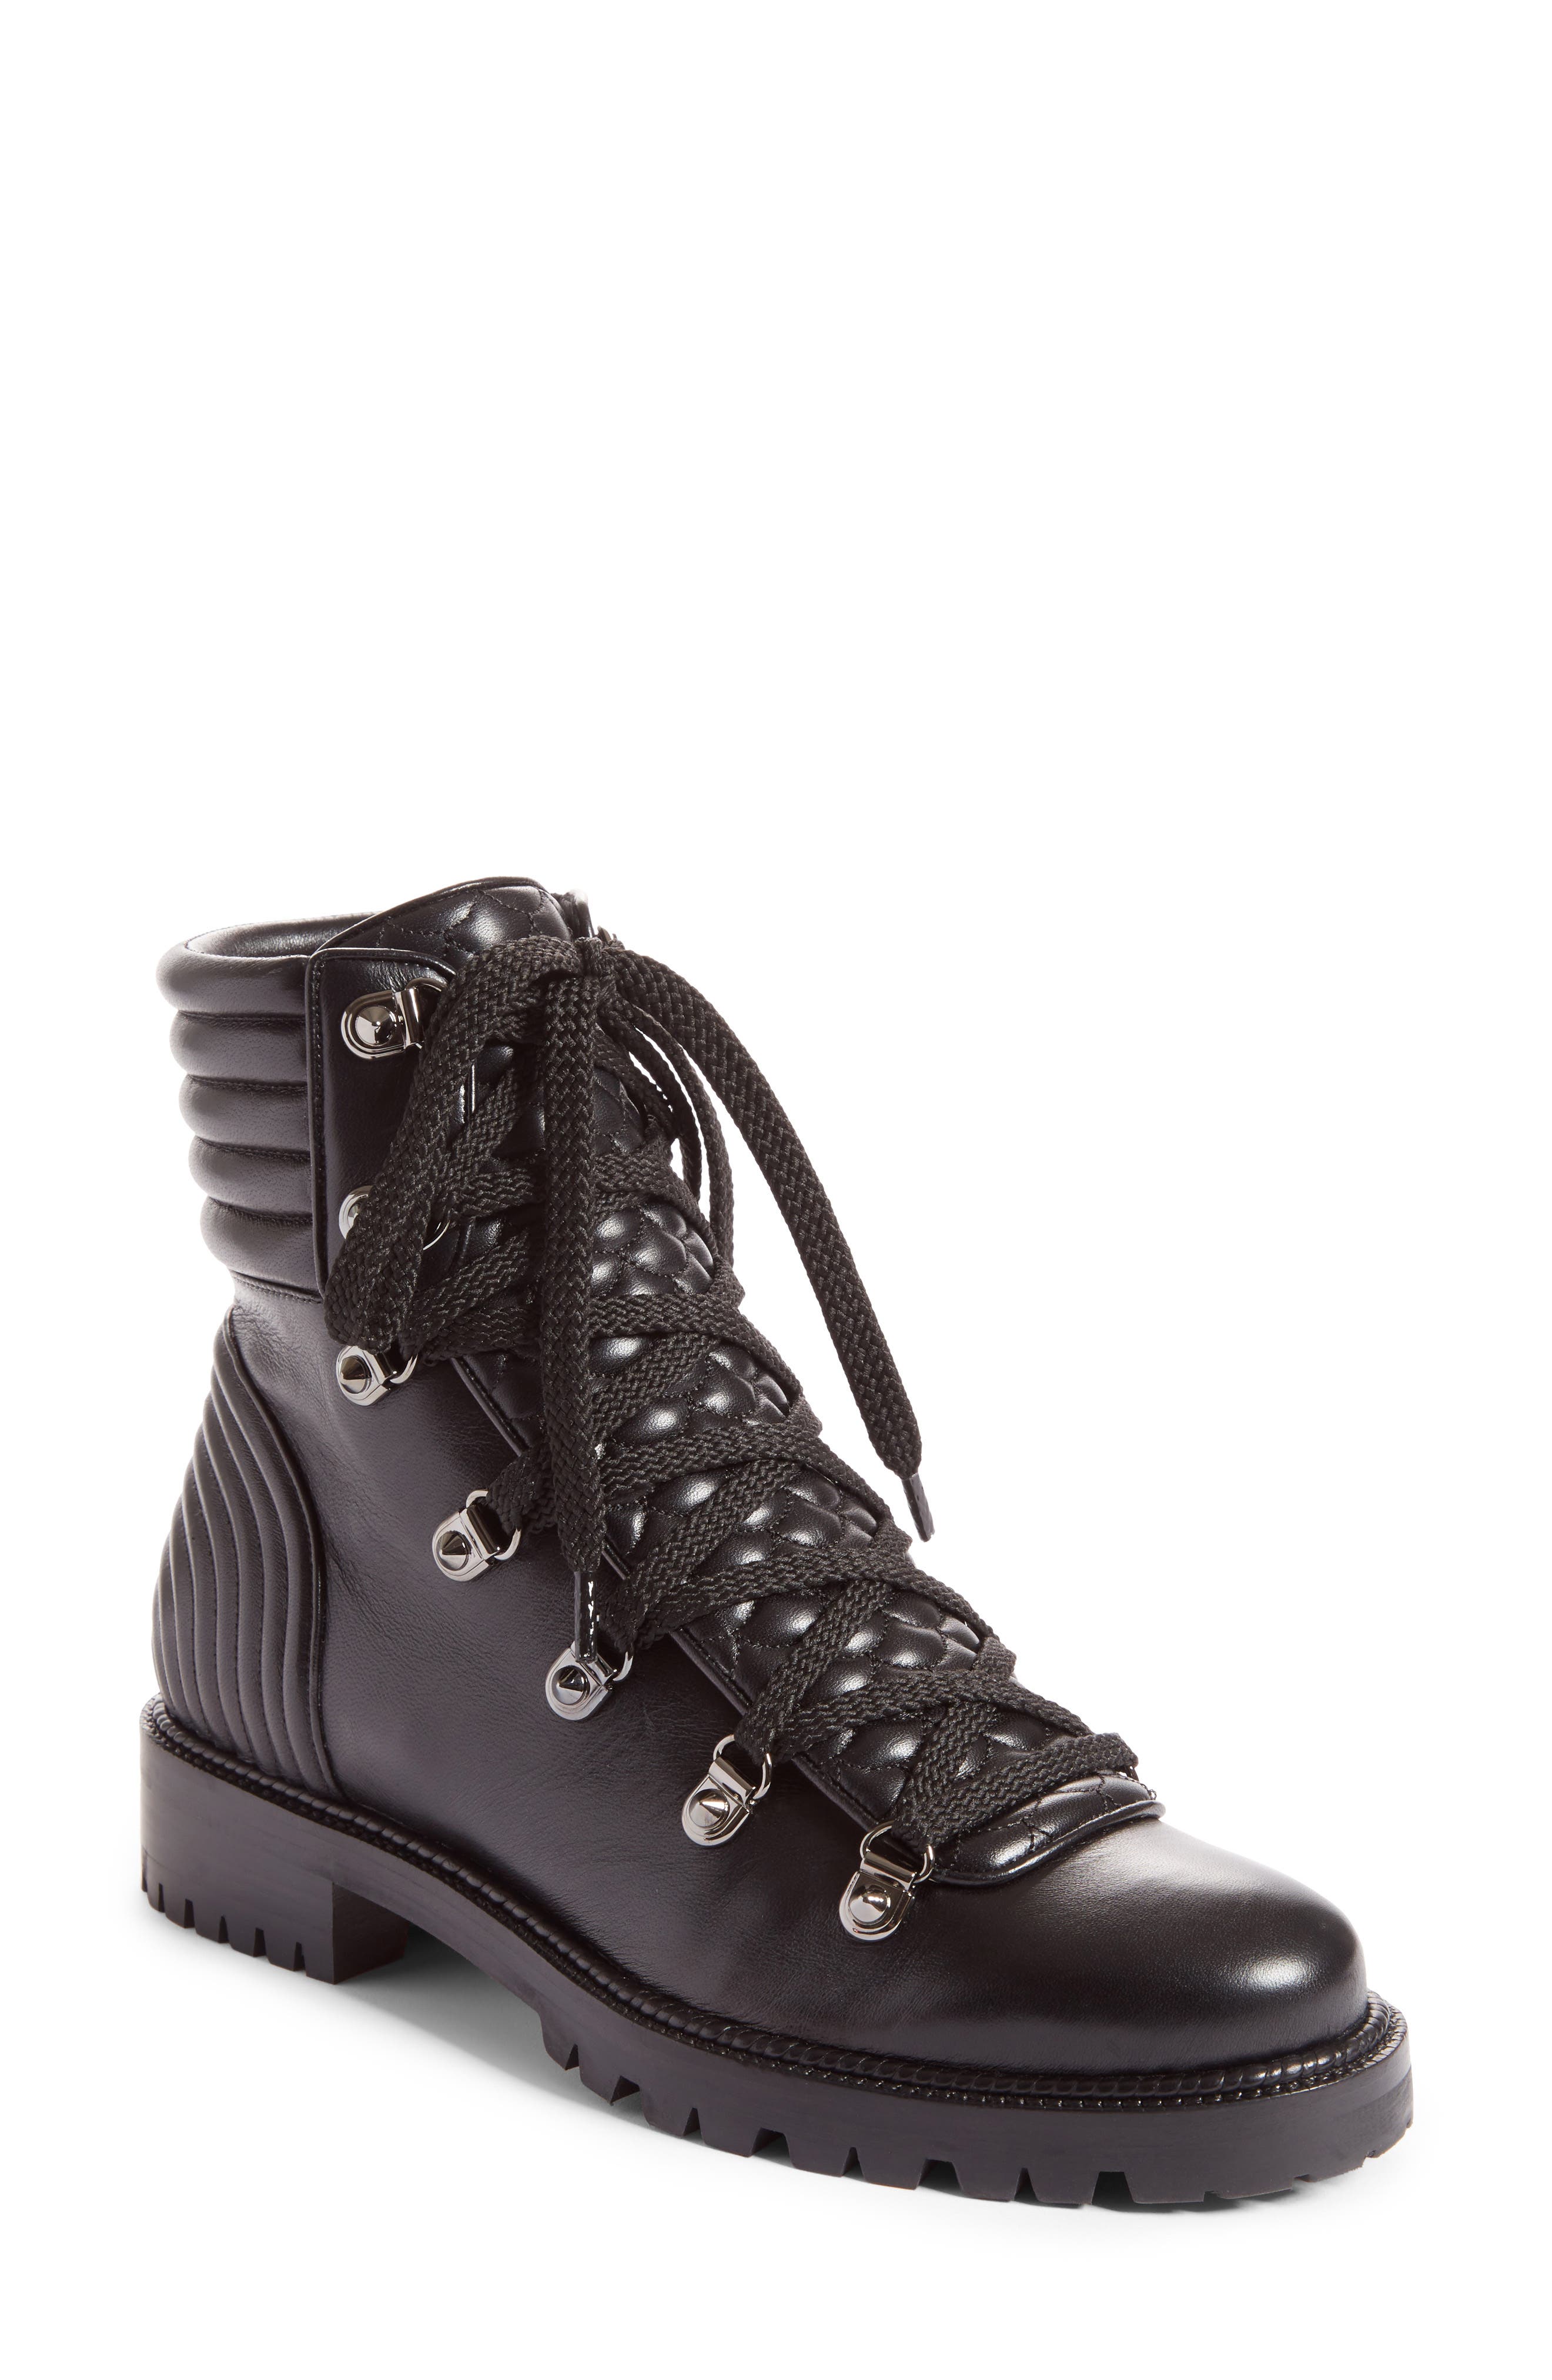 christian louboutin mad lace up boots